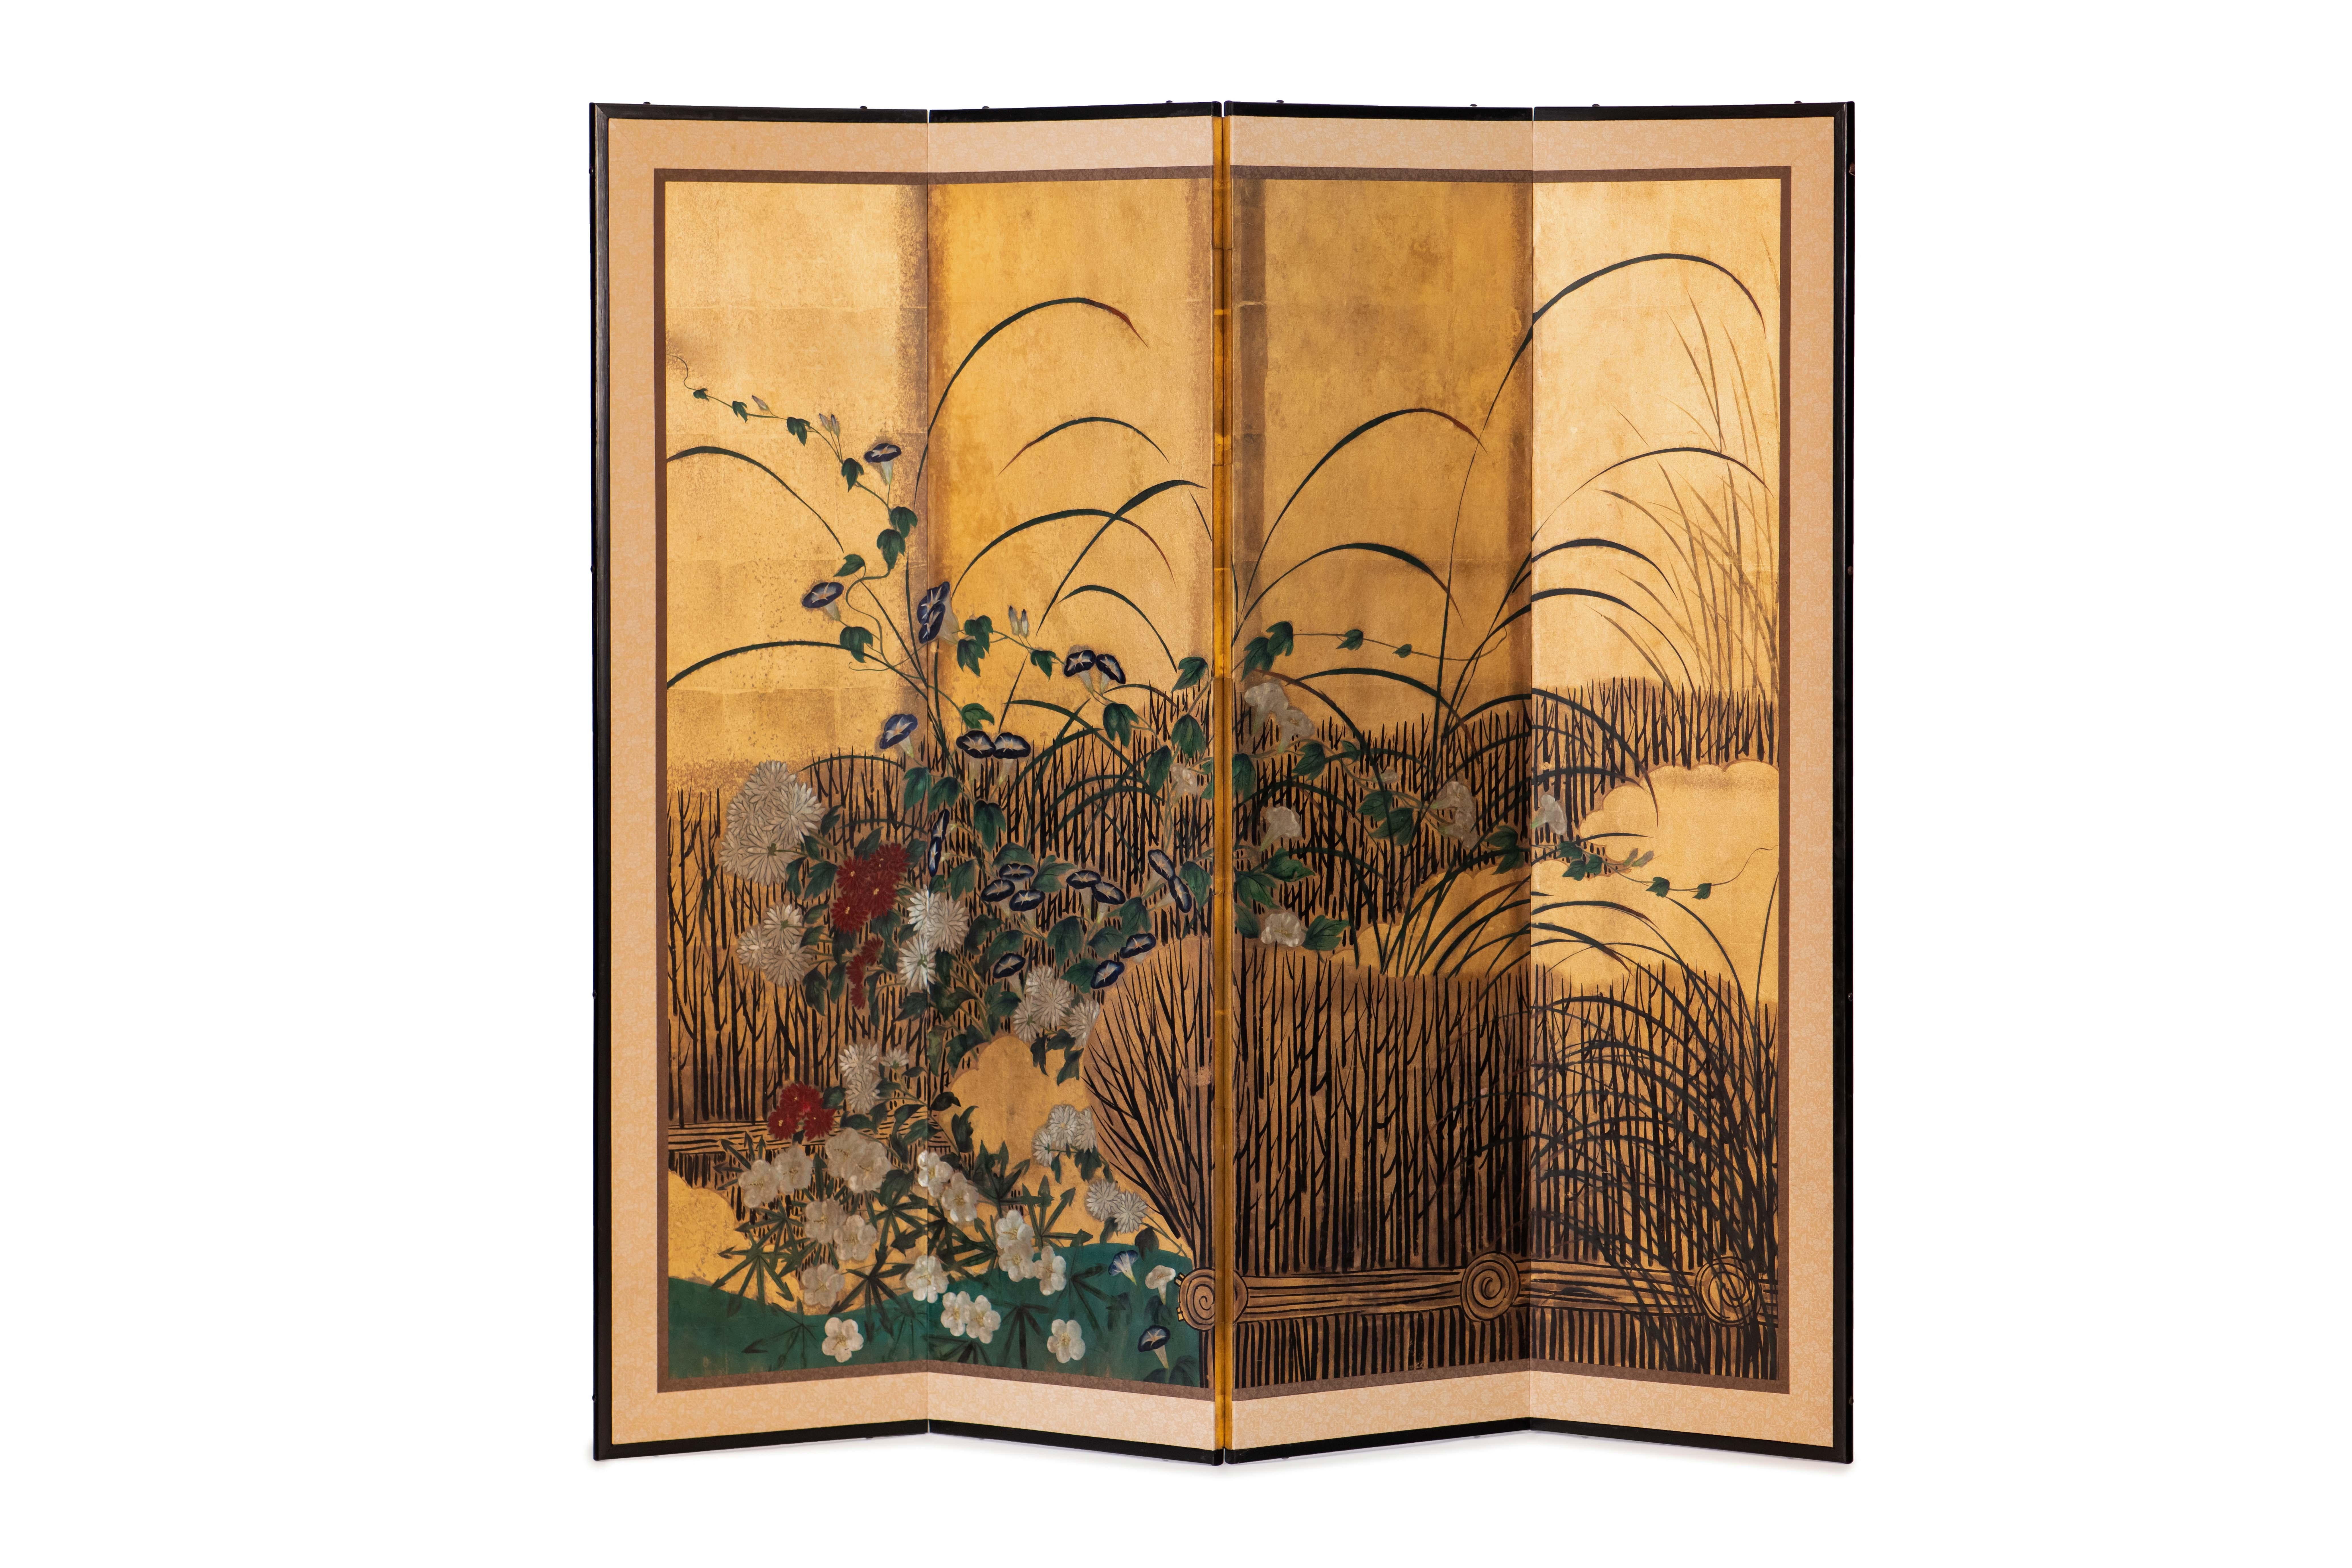 The chrysanthemum and willows painting of this four-panel screen is hand-painted in watercolor, on squares of gold leaf which are applied by hand to the paper base over carefully jointed wooden lattice frames. Lacquer rails are then applied to the